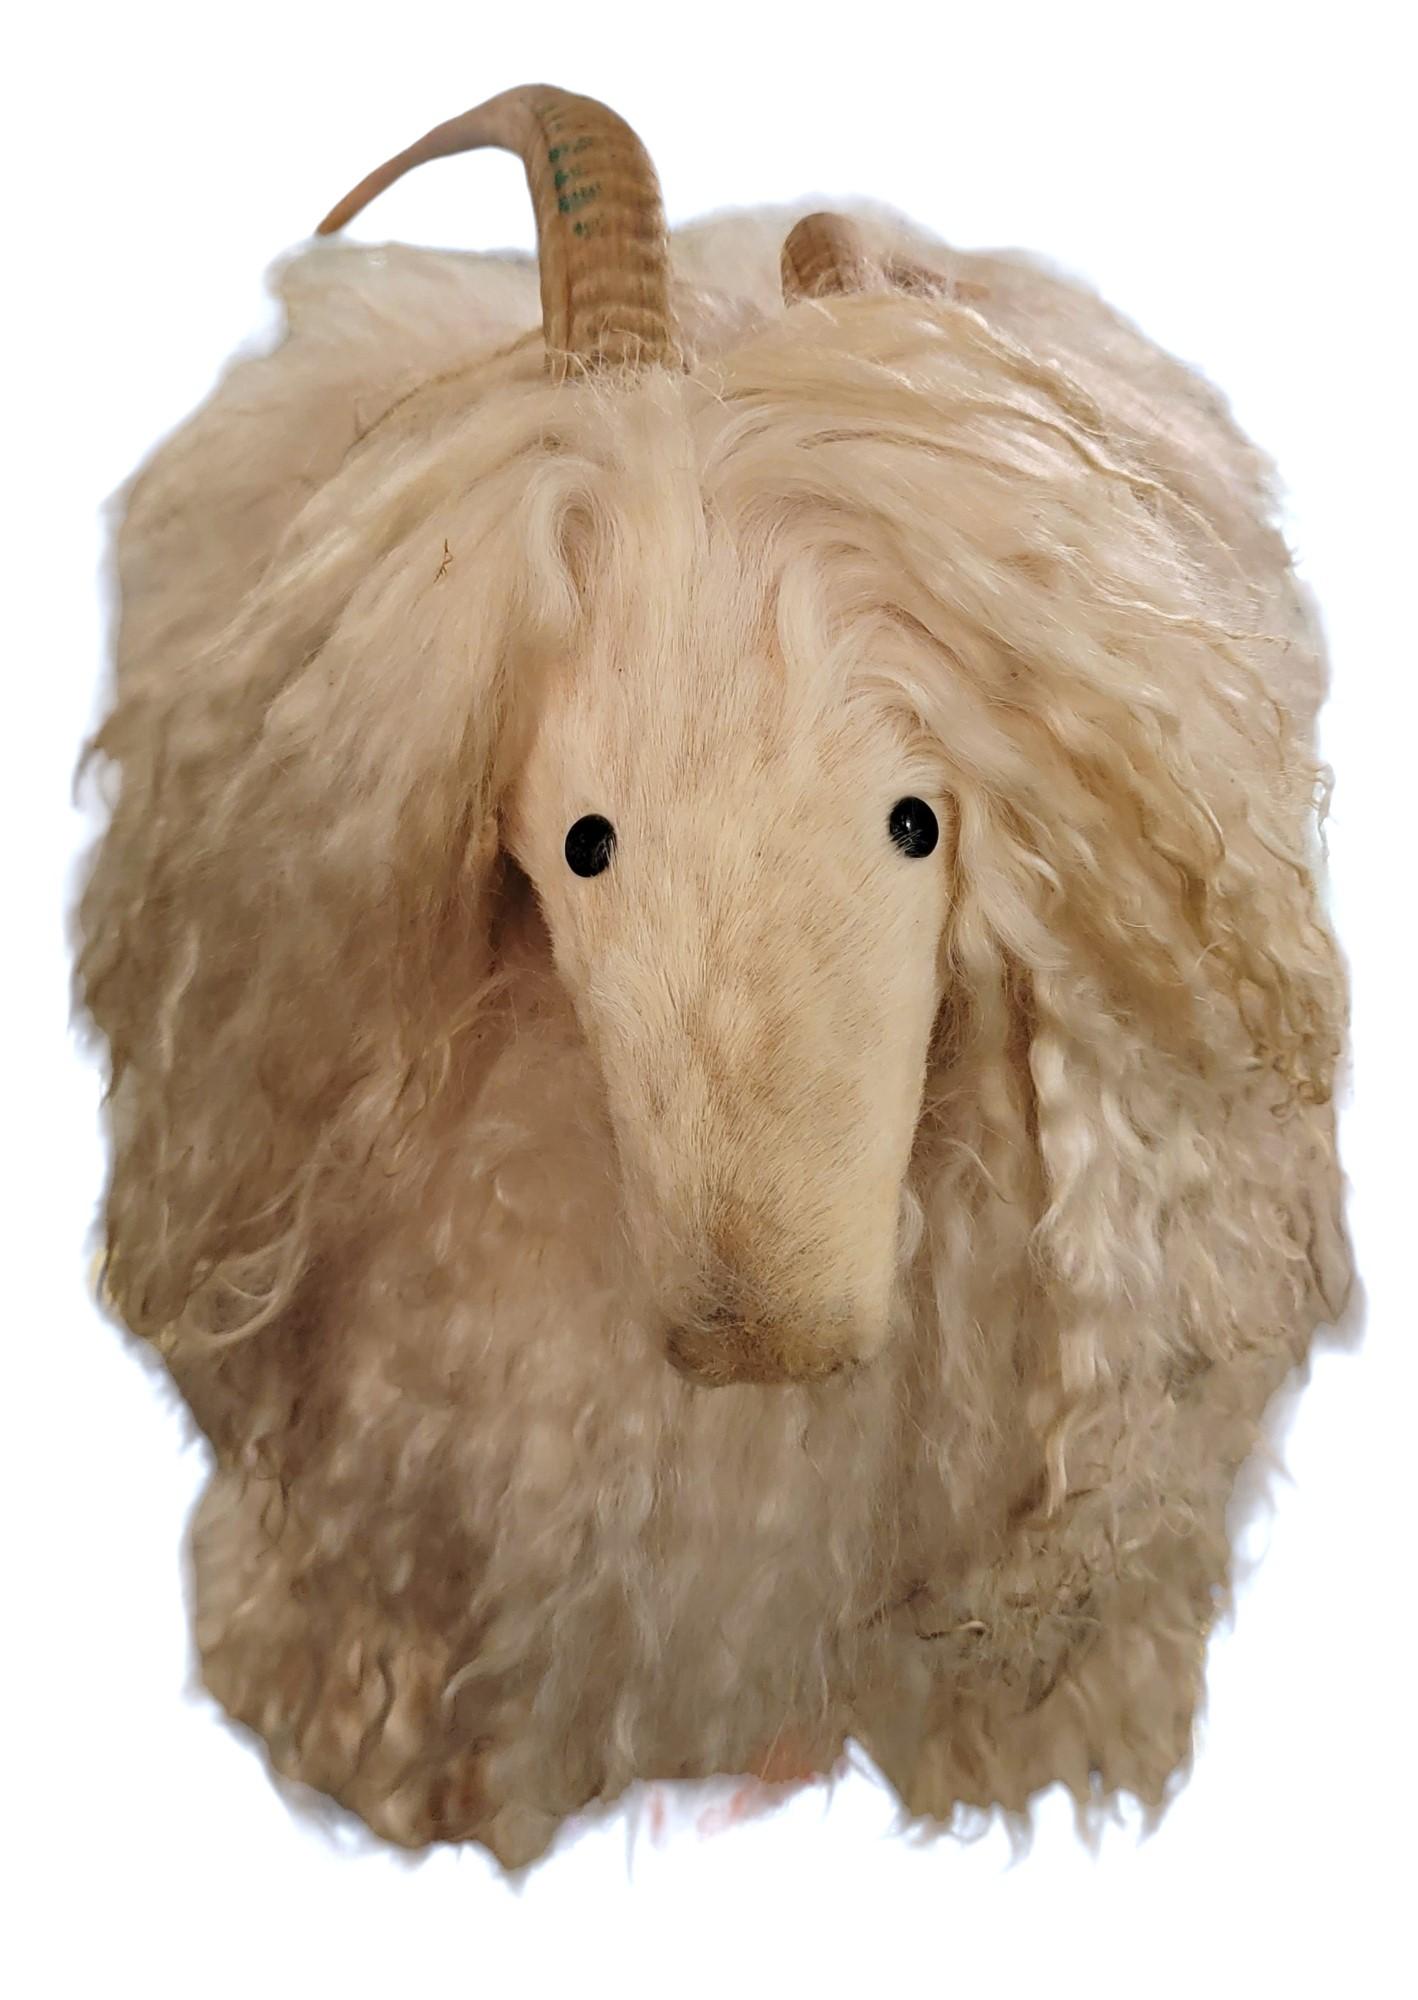 1960s Lalanne Style French Long Hair Sheep. the base is made from a solid wood that is then wrapped in a long hair spread. Wonderful design. Measures approx - 19h x 23deep x 11 wide
